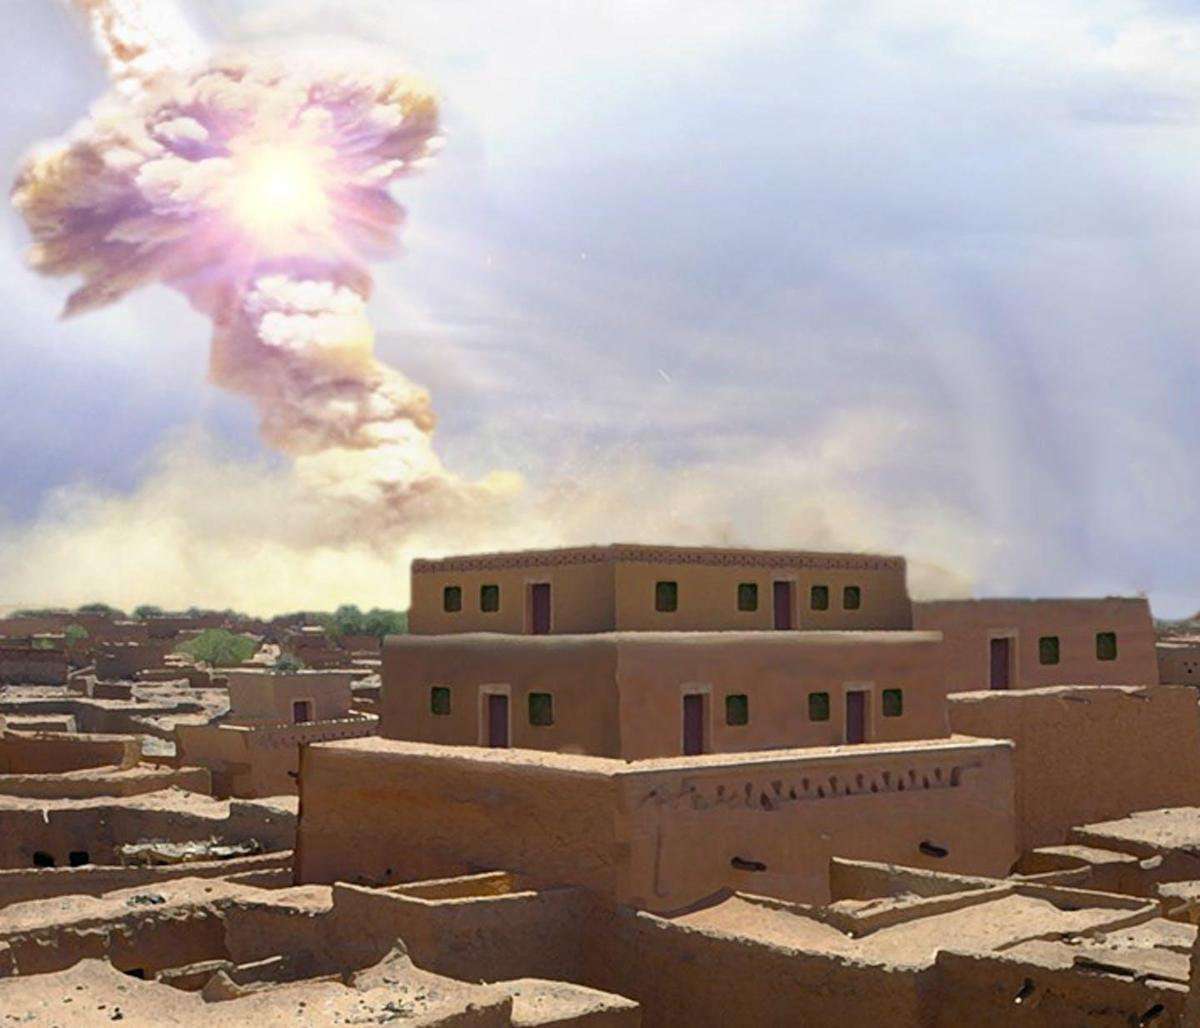 image for A giant space rock demolished an ancient Middle Eastern city and everyone in it – possibly inspiring the Biblical story of Sodom